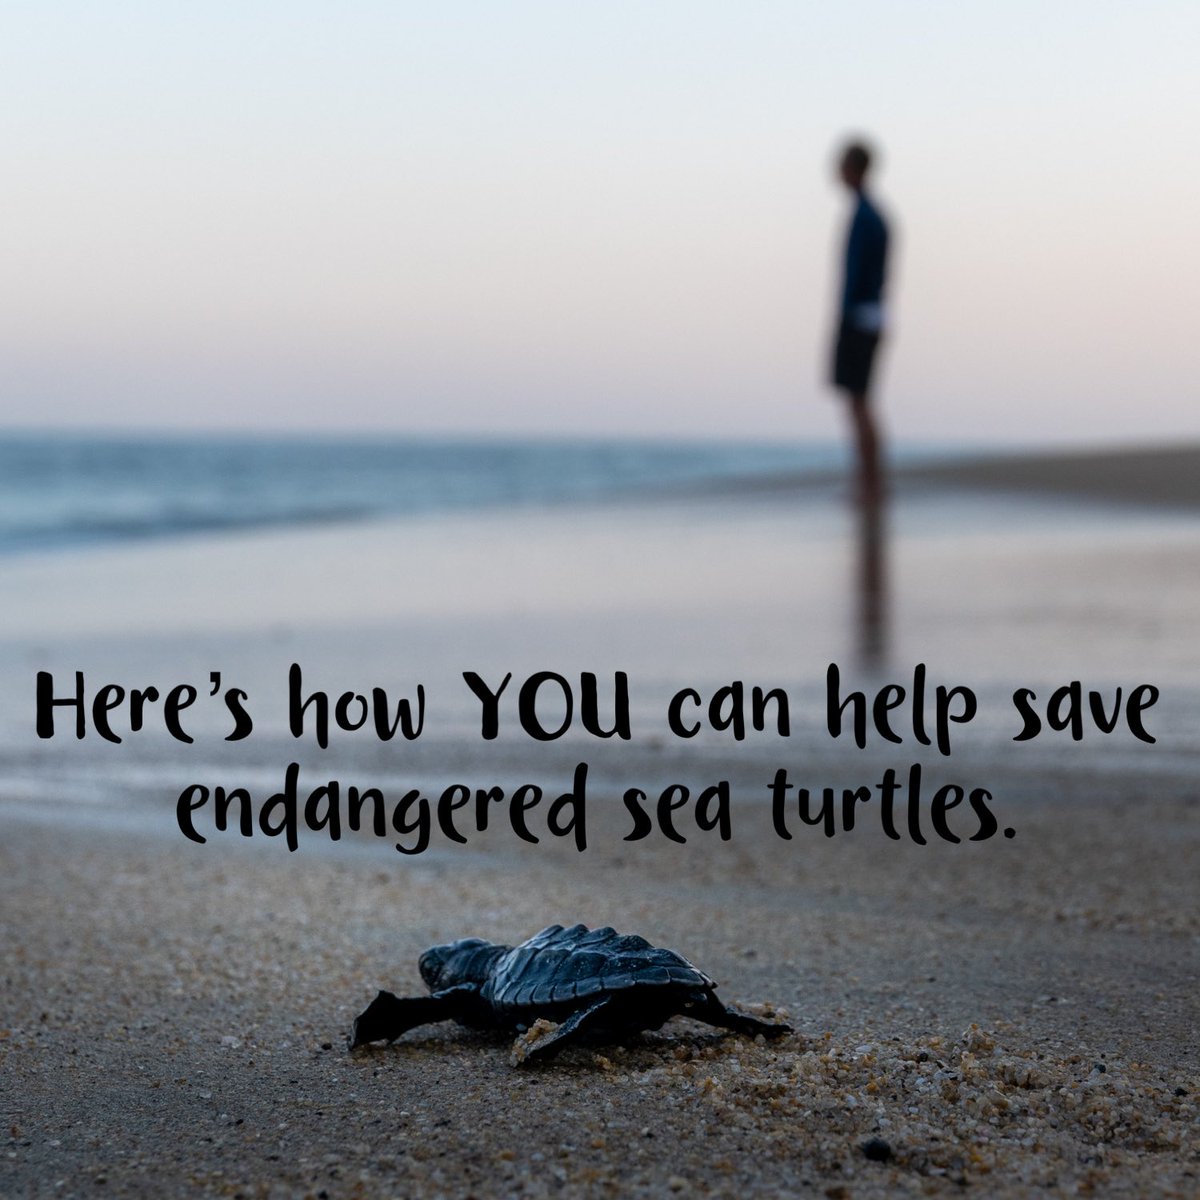 The official #seaturtle nesting season may be over, but you can help save sea turtles all year long. #education #awareness #protection #savetheseaturtles #seaturtlelove #NSTSTF #extinctionisforever 

Find out how ➡️
savetheseaturtle.org